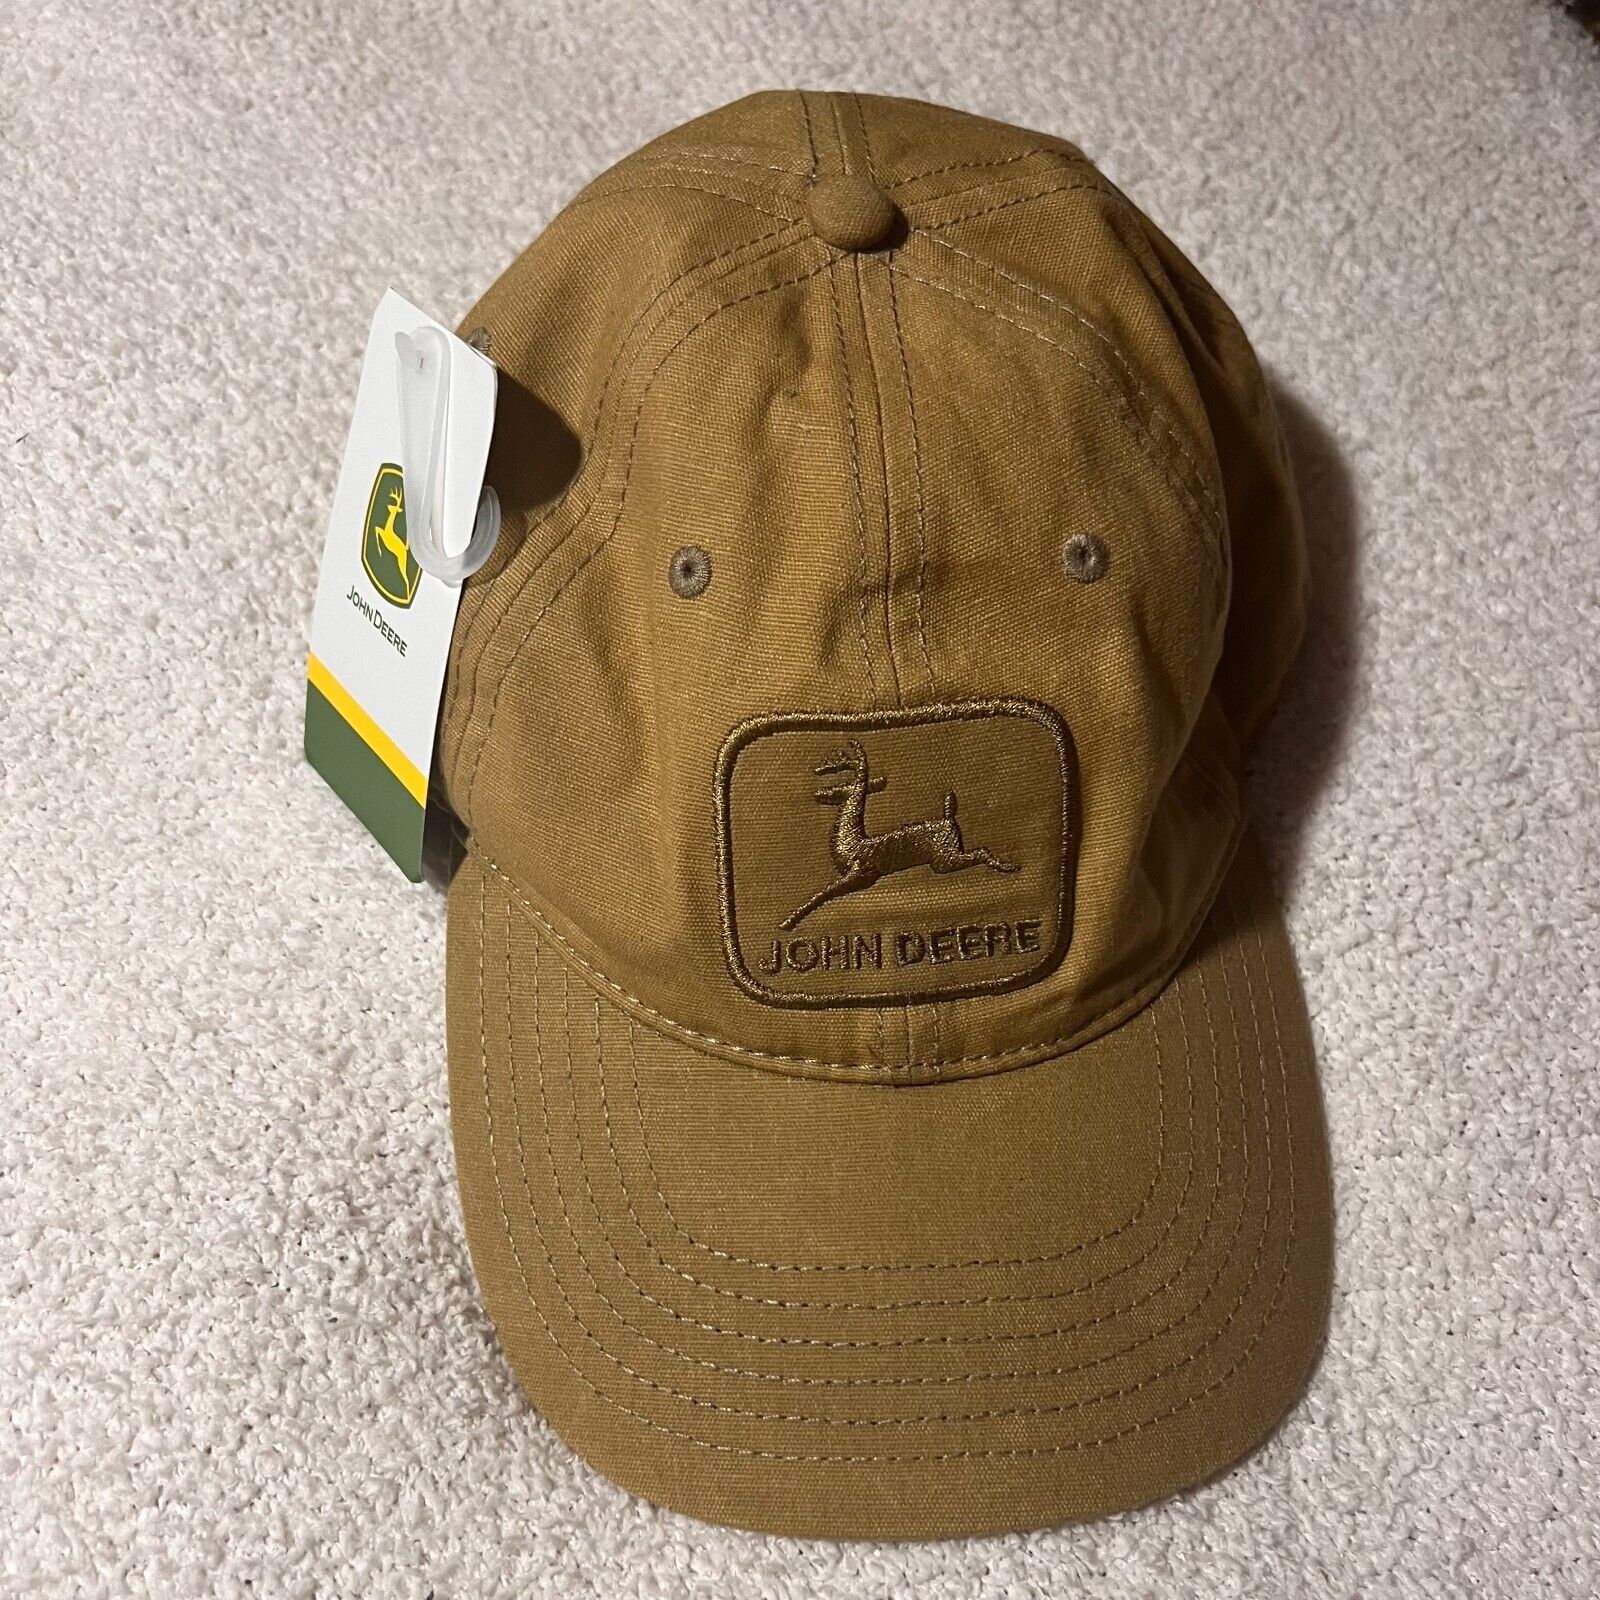 Authentic John Deere Hat New with Tags Duck Canvas Color One Size Fits All